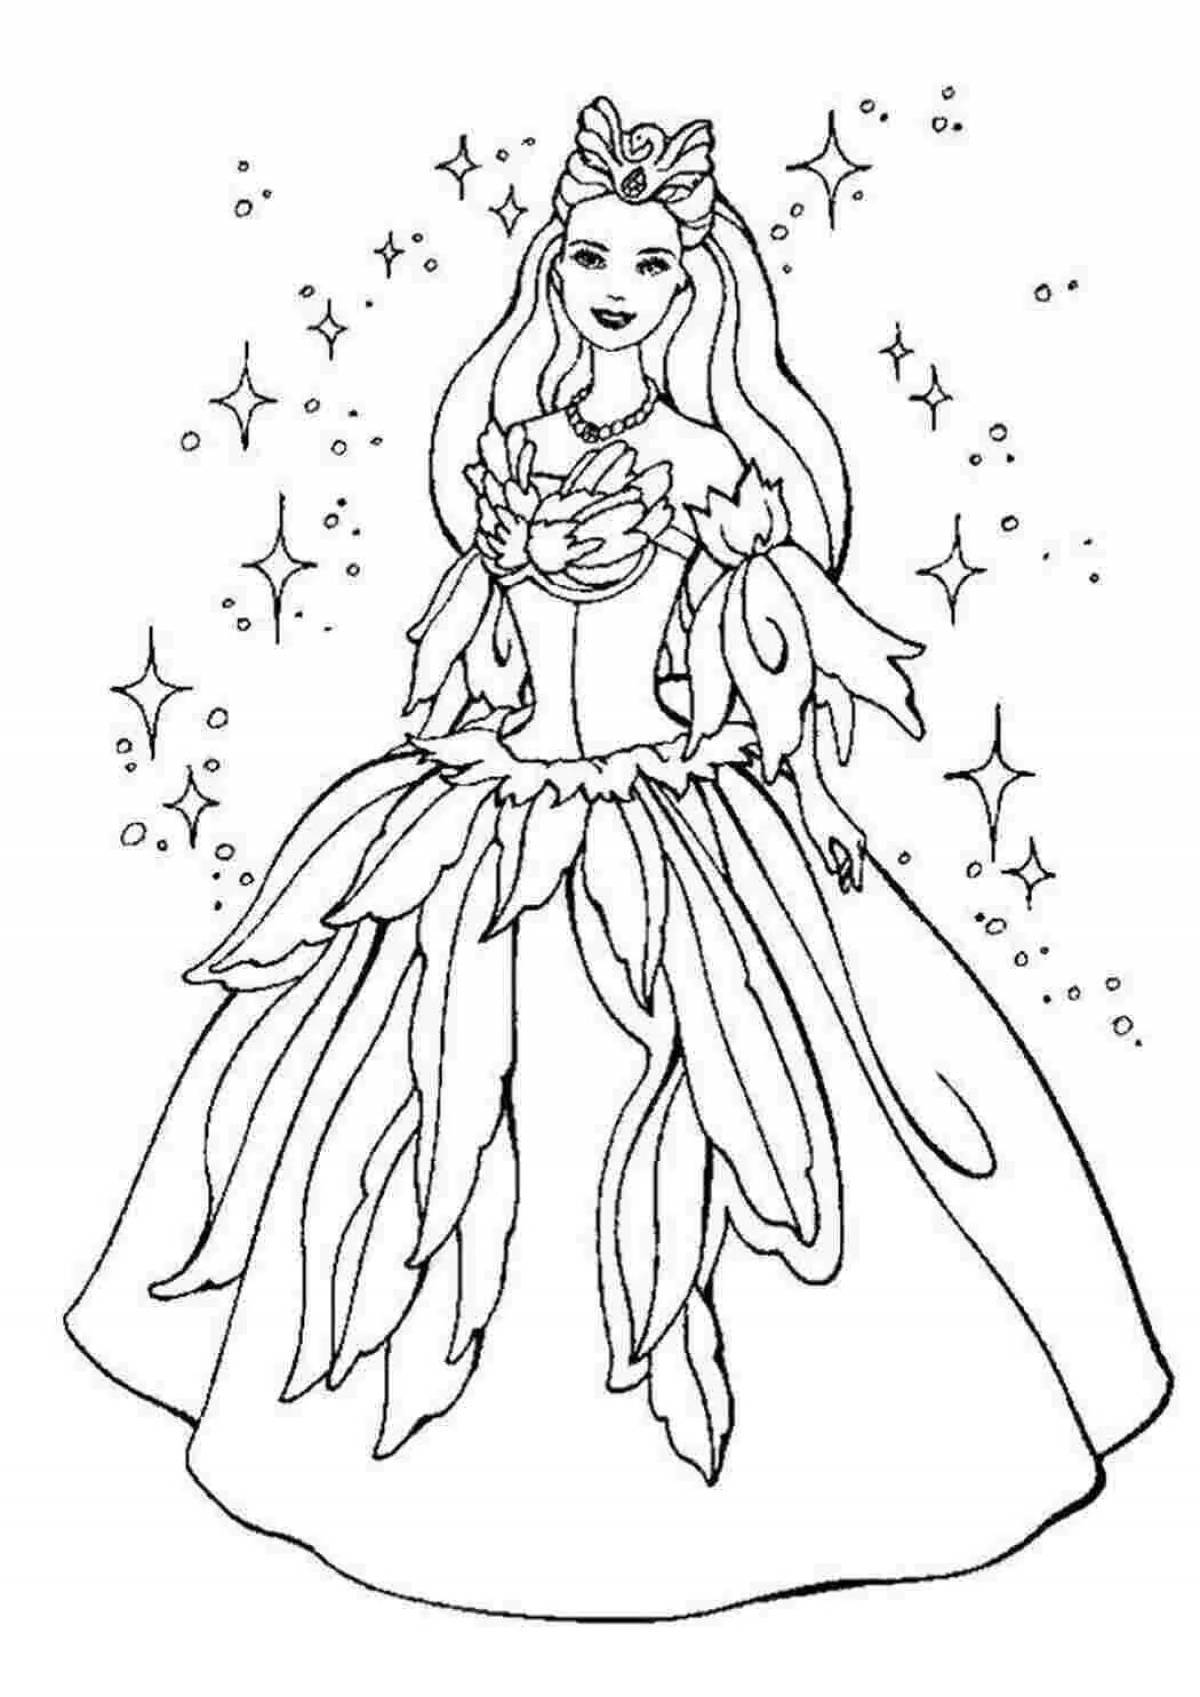 Colourful princess coloring pages for girls 7 years old